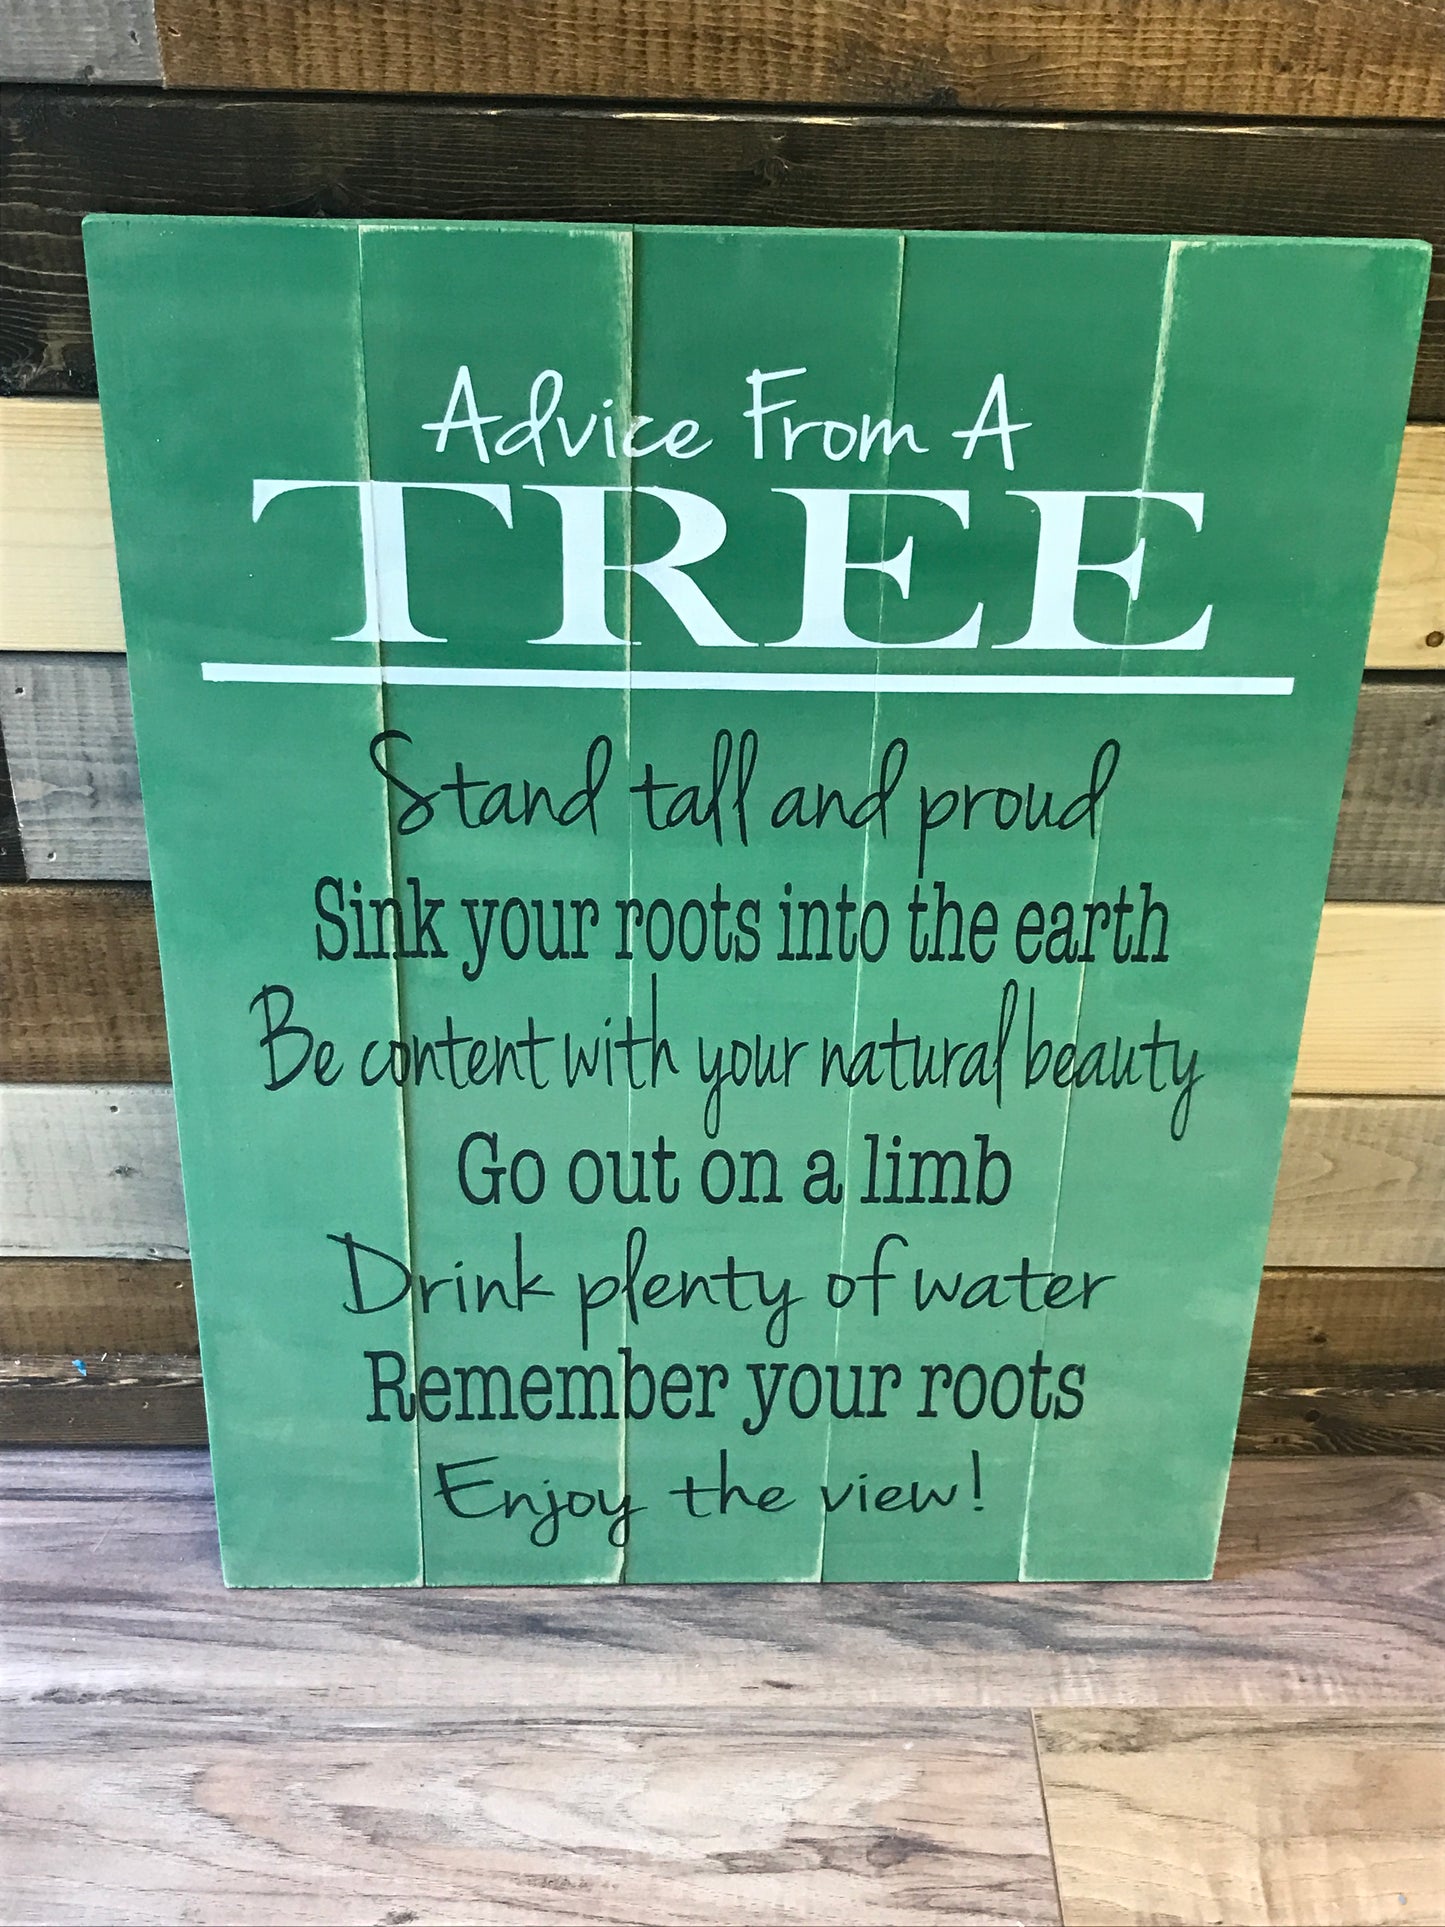 Advice From a Tree 202461